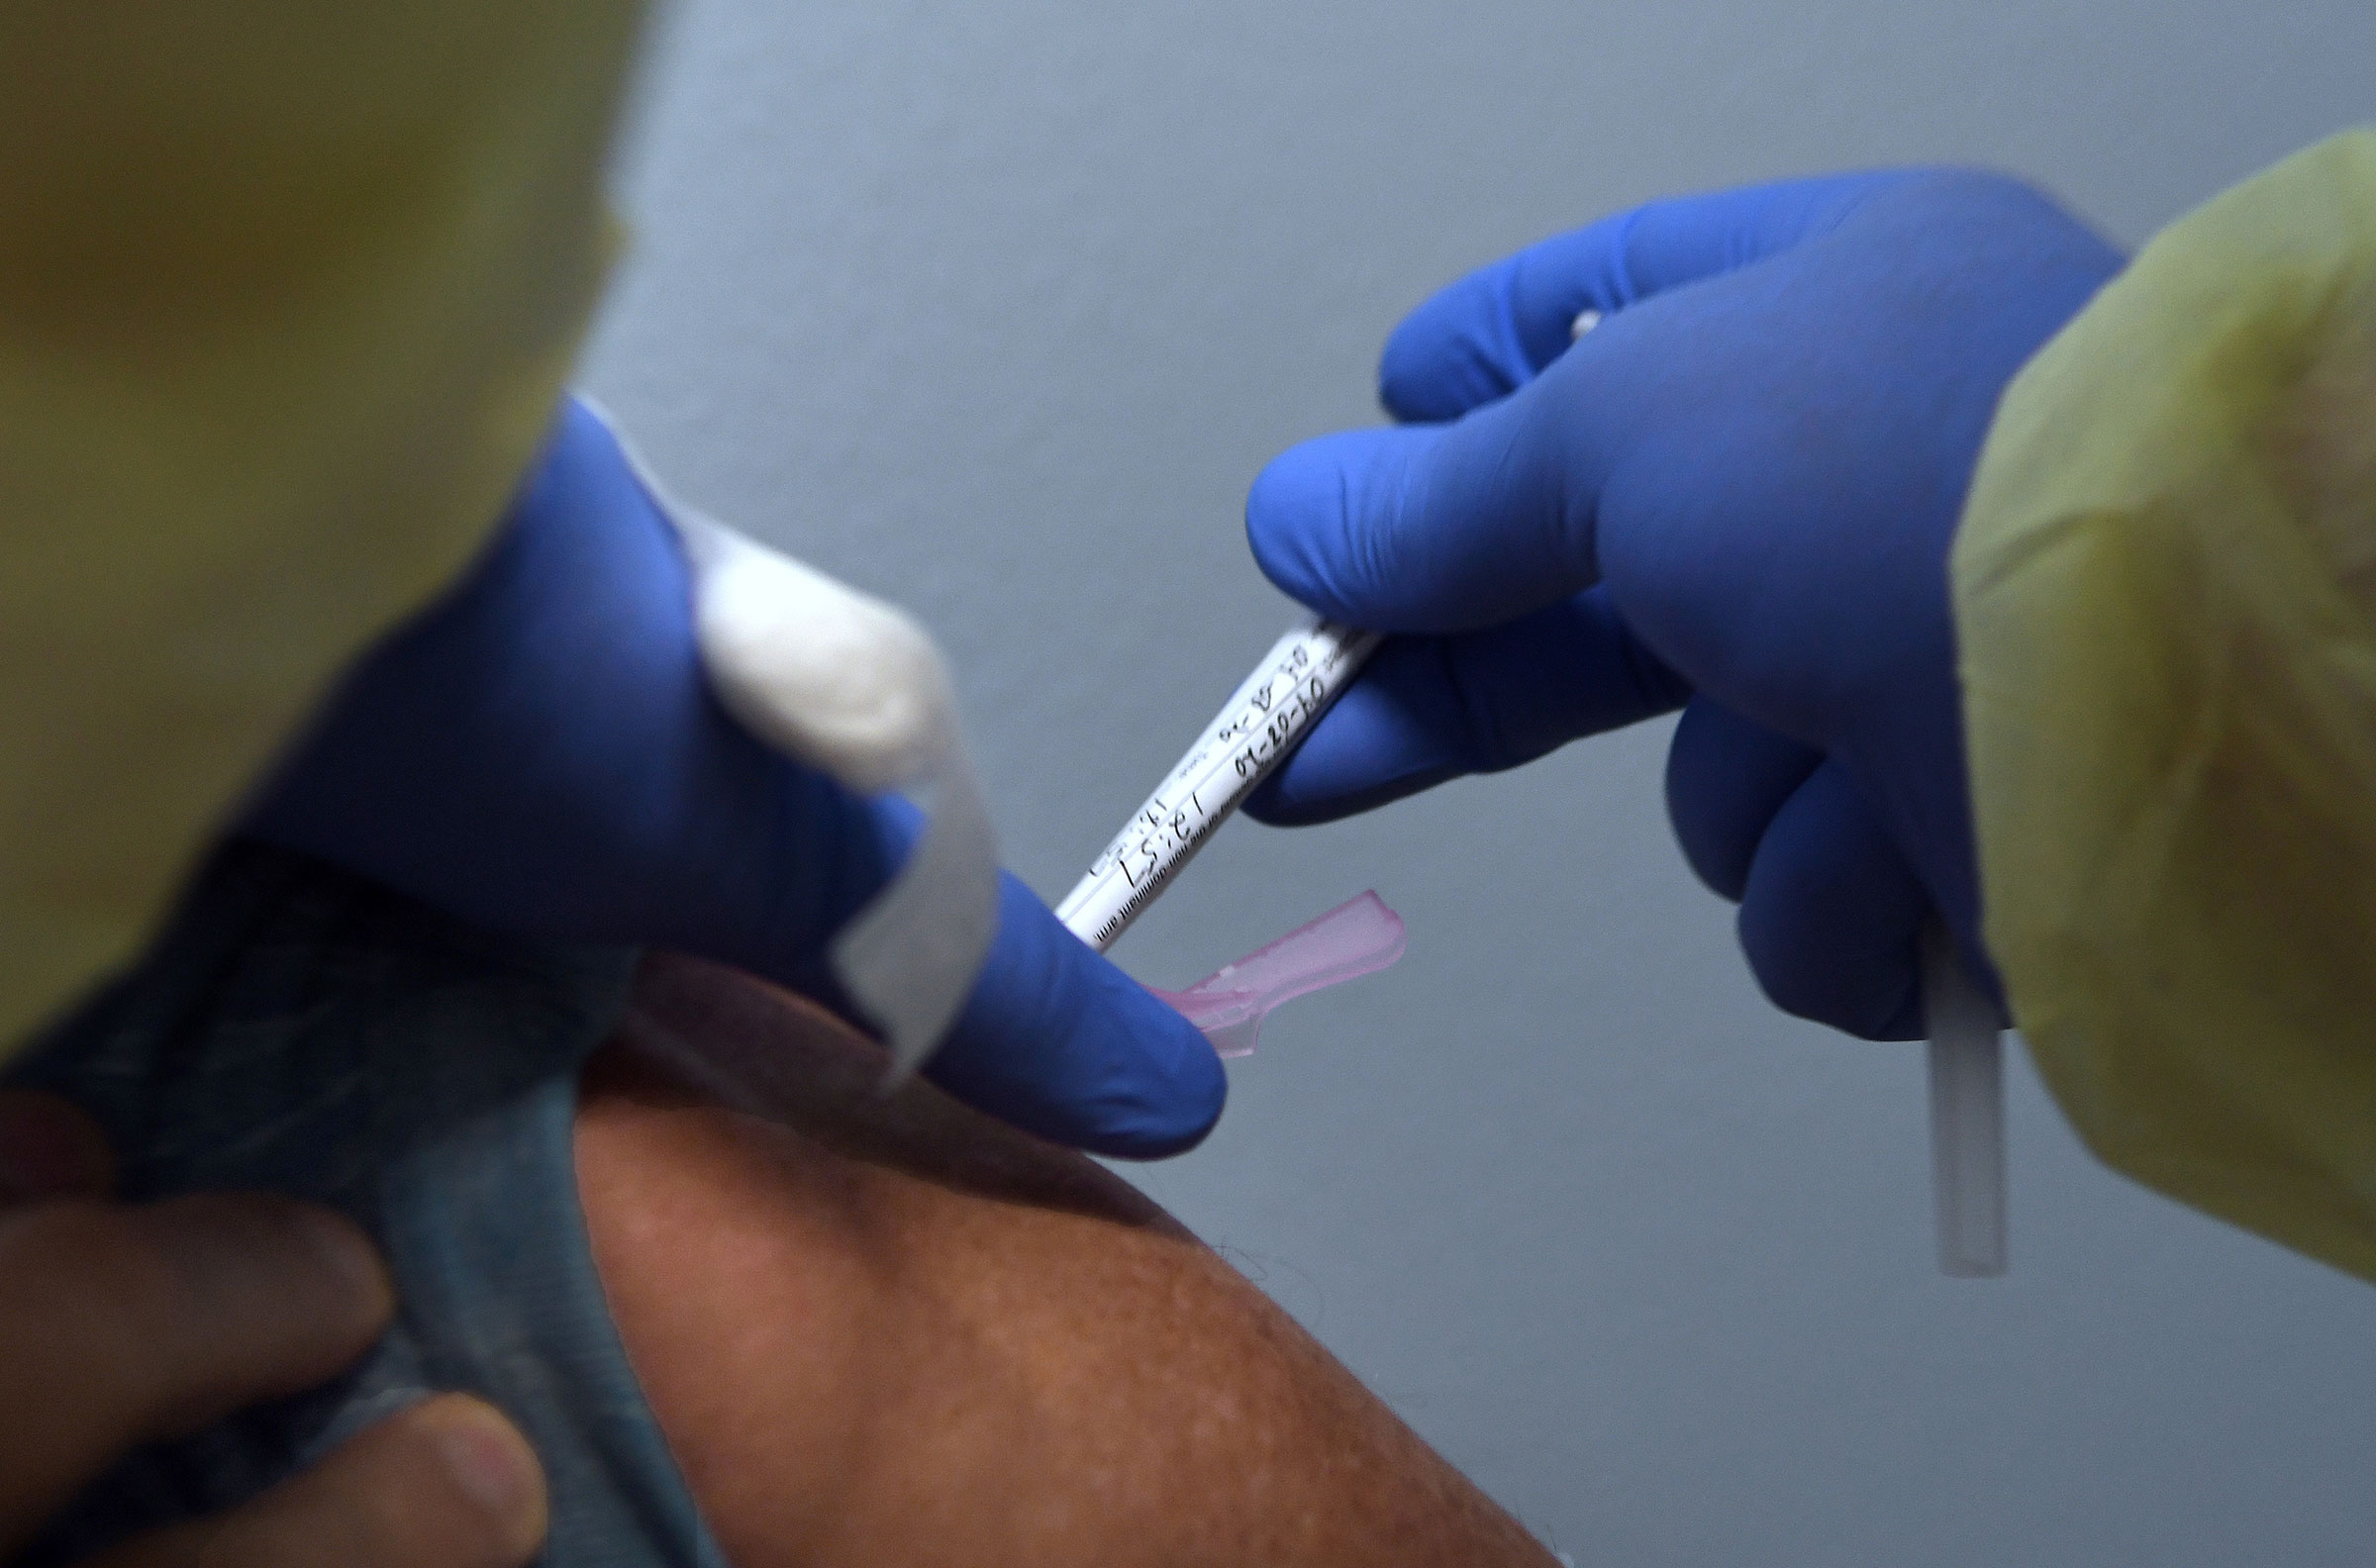 A participant receives an injection as part of a Covid-19 vaccine clinical trial sponsored by Moderna on August 4 in DeLand, Florida.